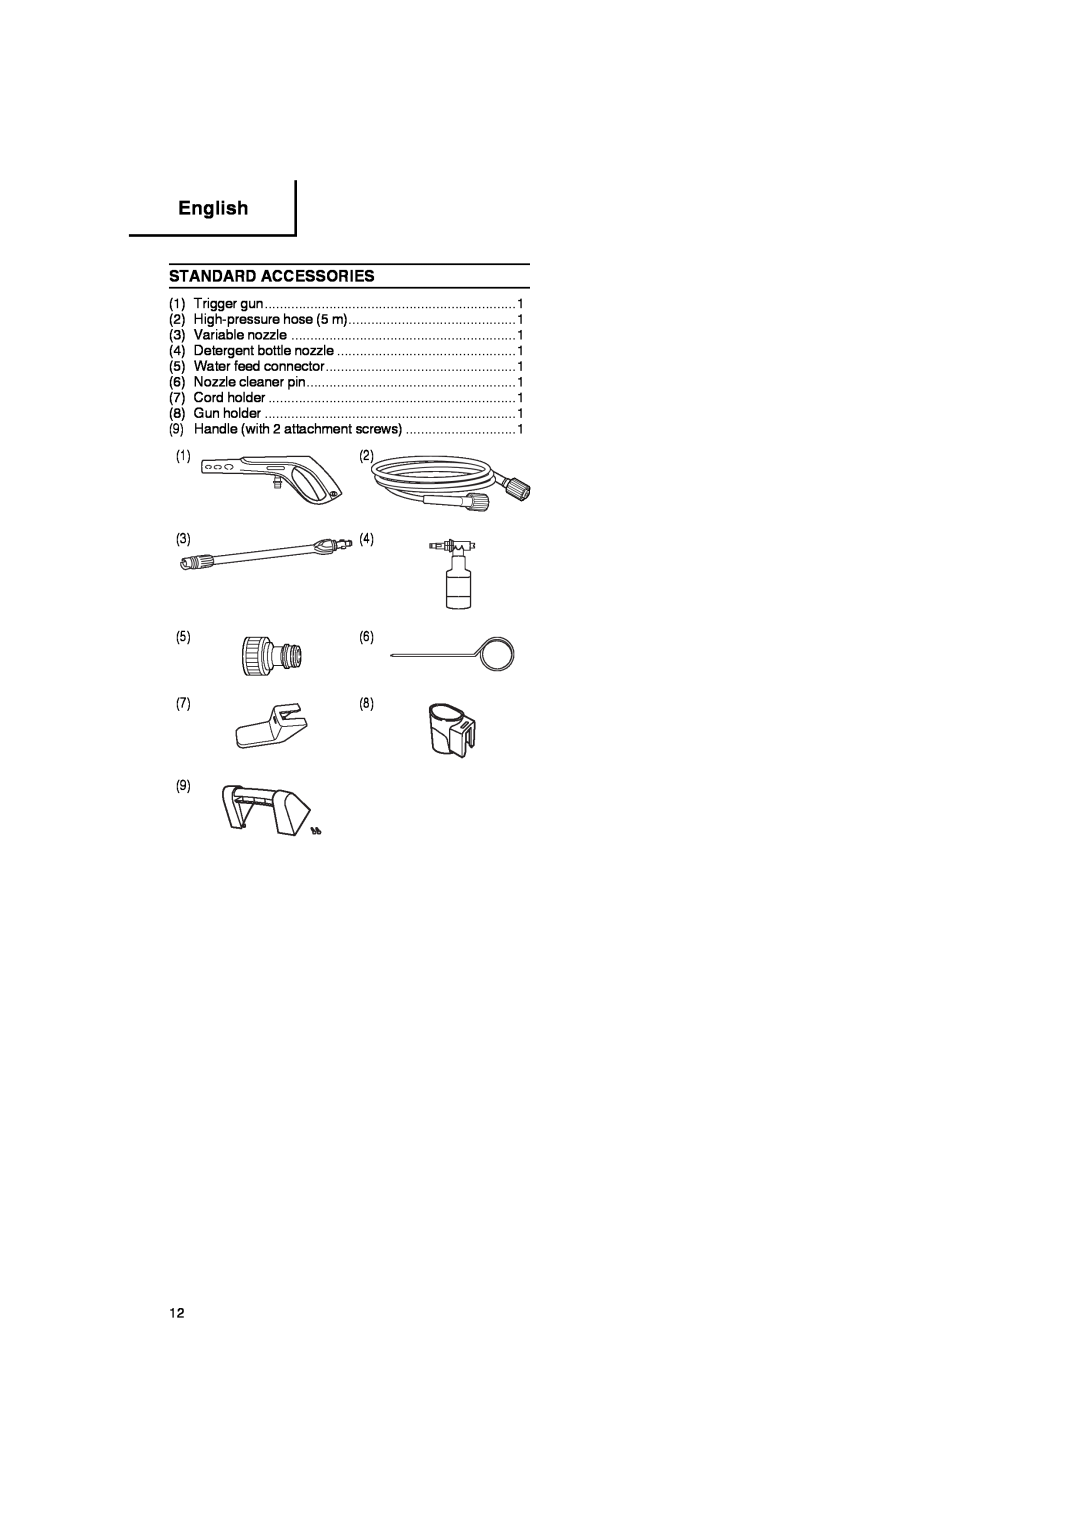 Hitachi AW 100 manual Standard Accessories, Trigger gun, Variable nozzle, Detergent bottle nozzle, Water feed connector 